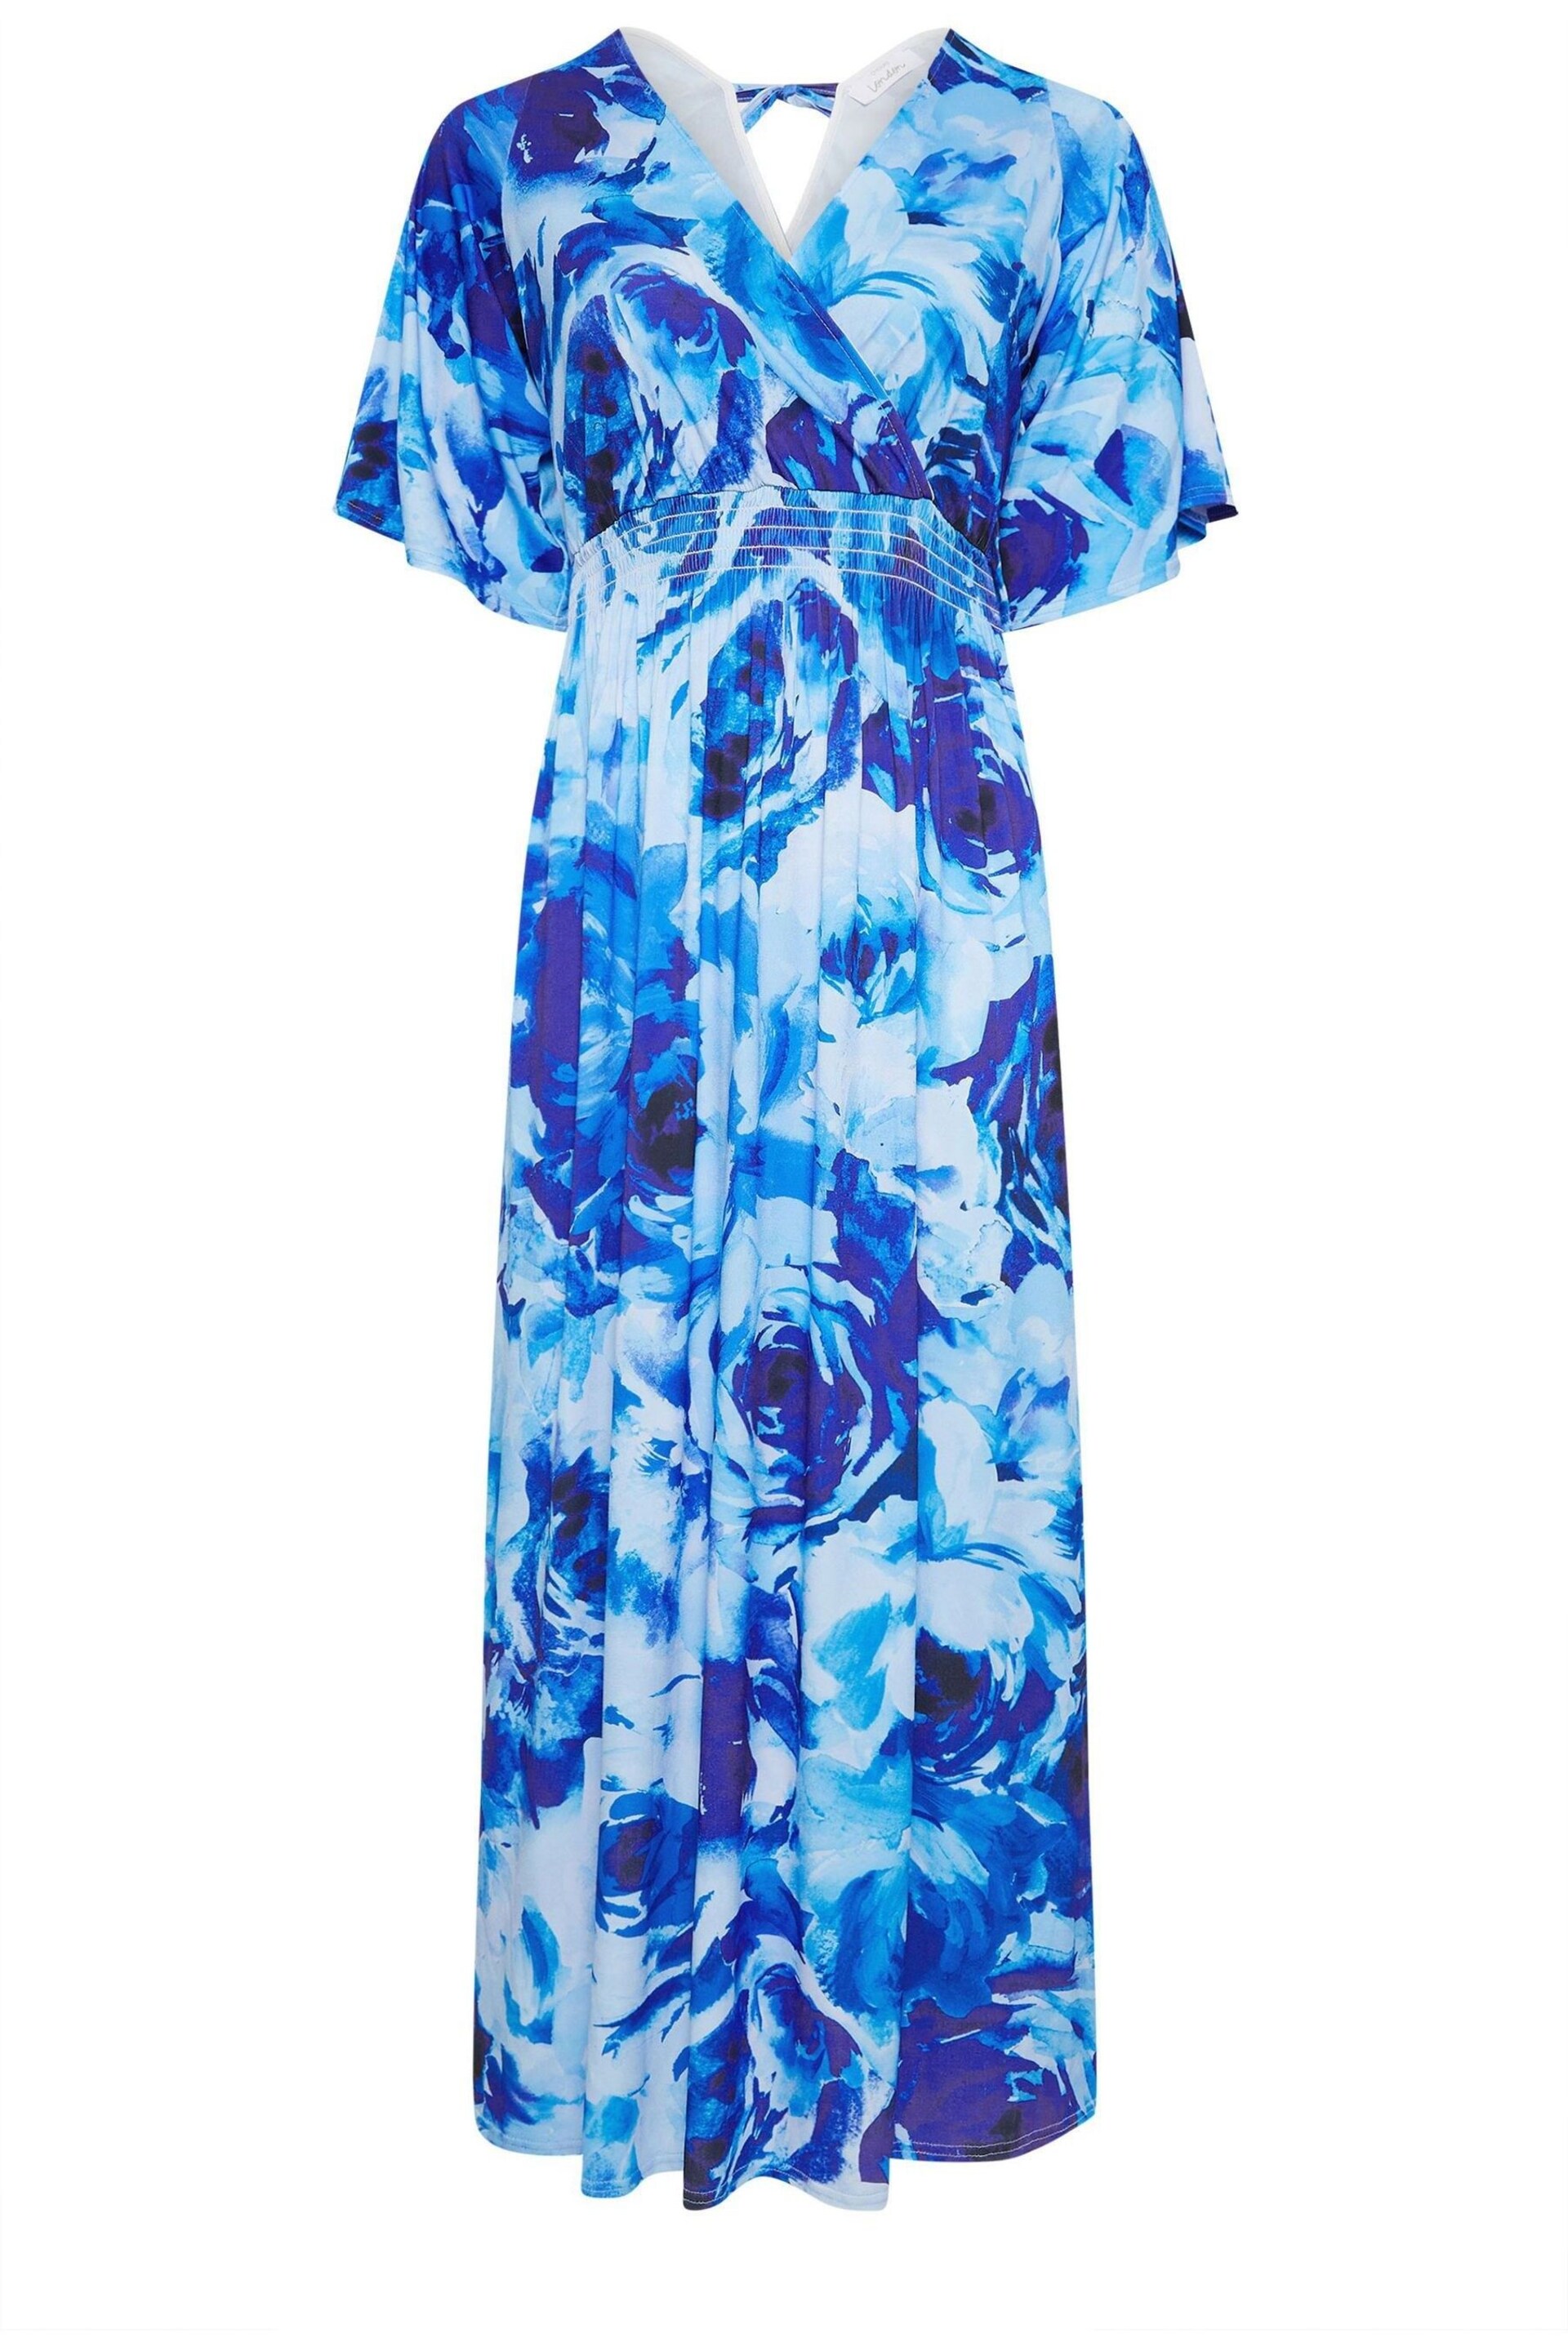 Yours Curve Blue London Floral Angel Sleeve Maxi Dress - Image 5 of 5